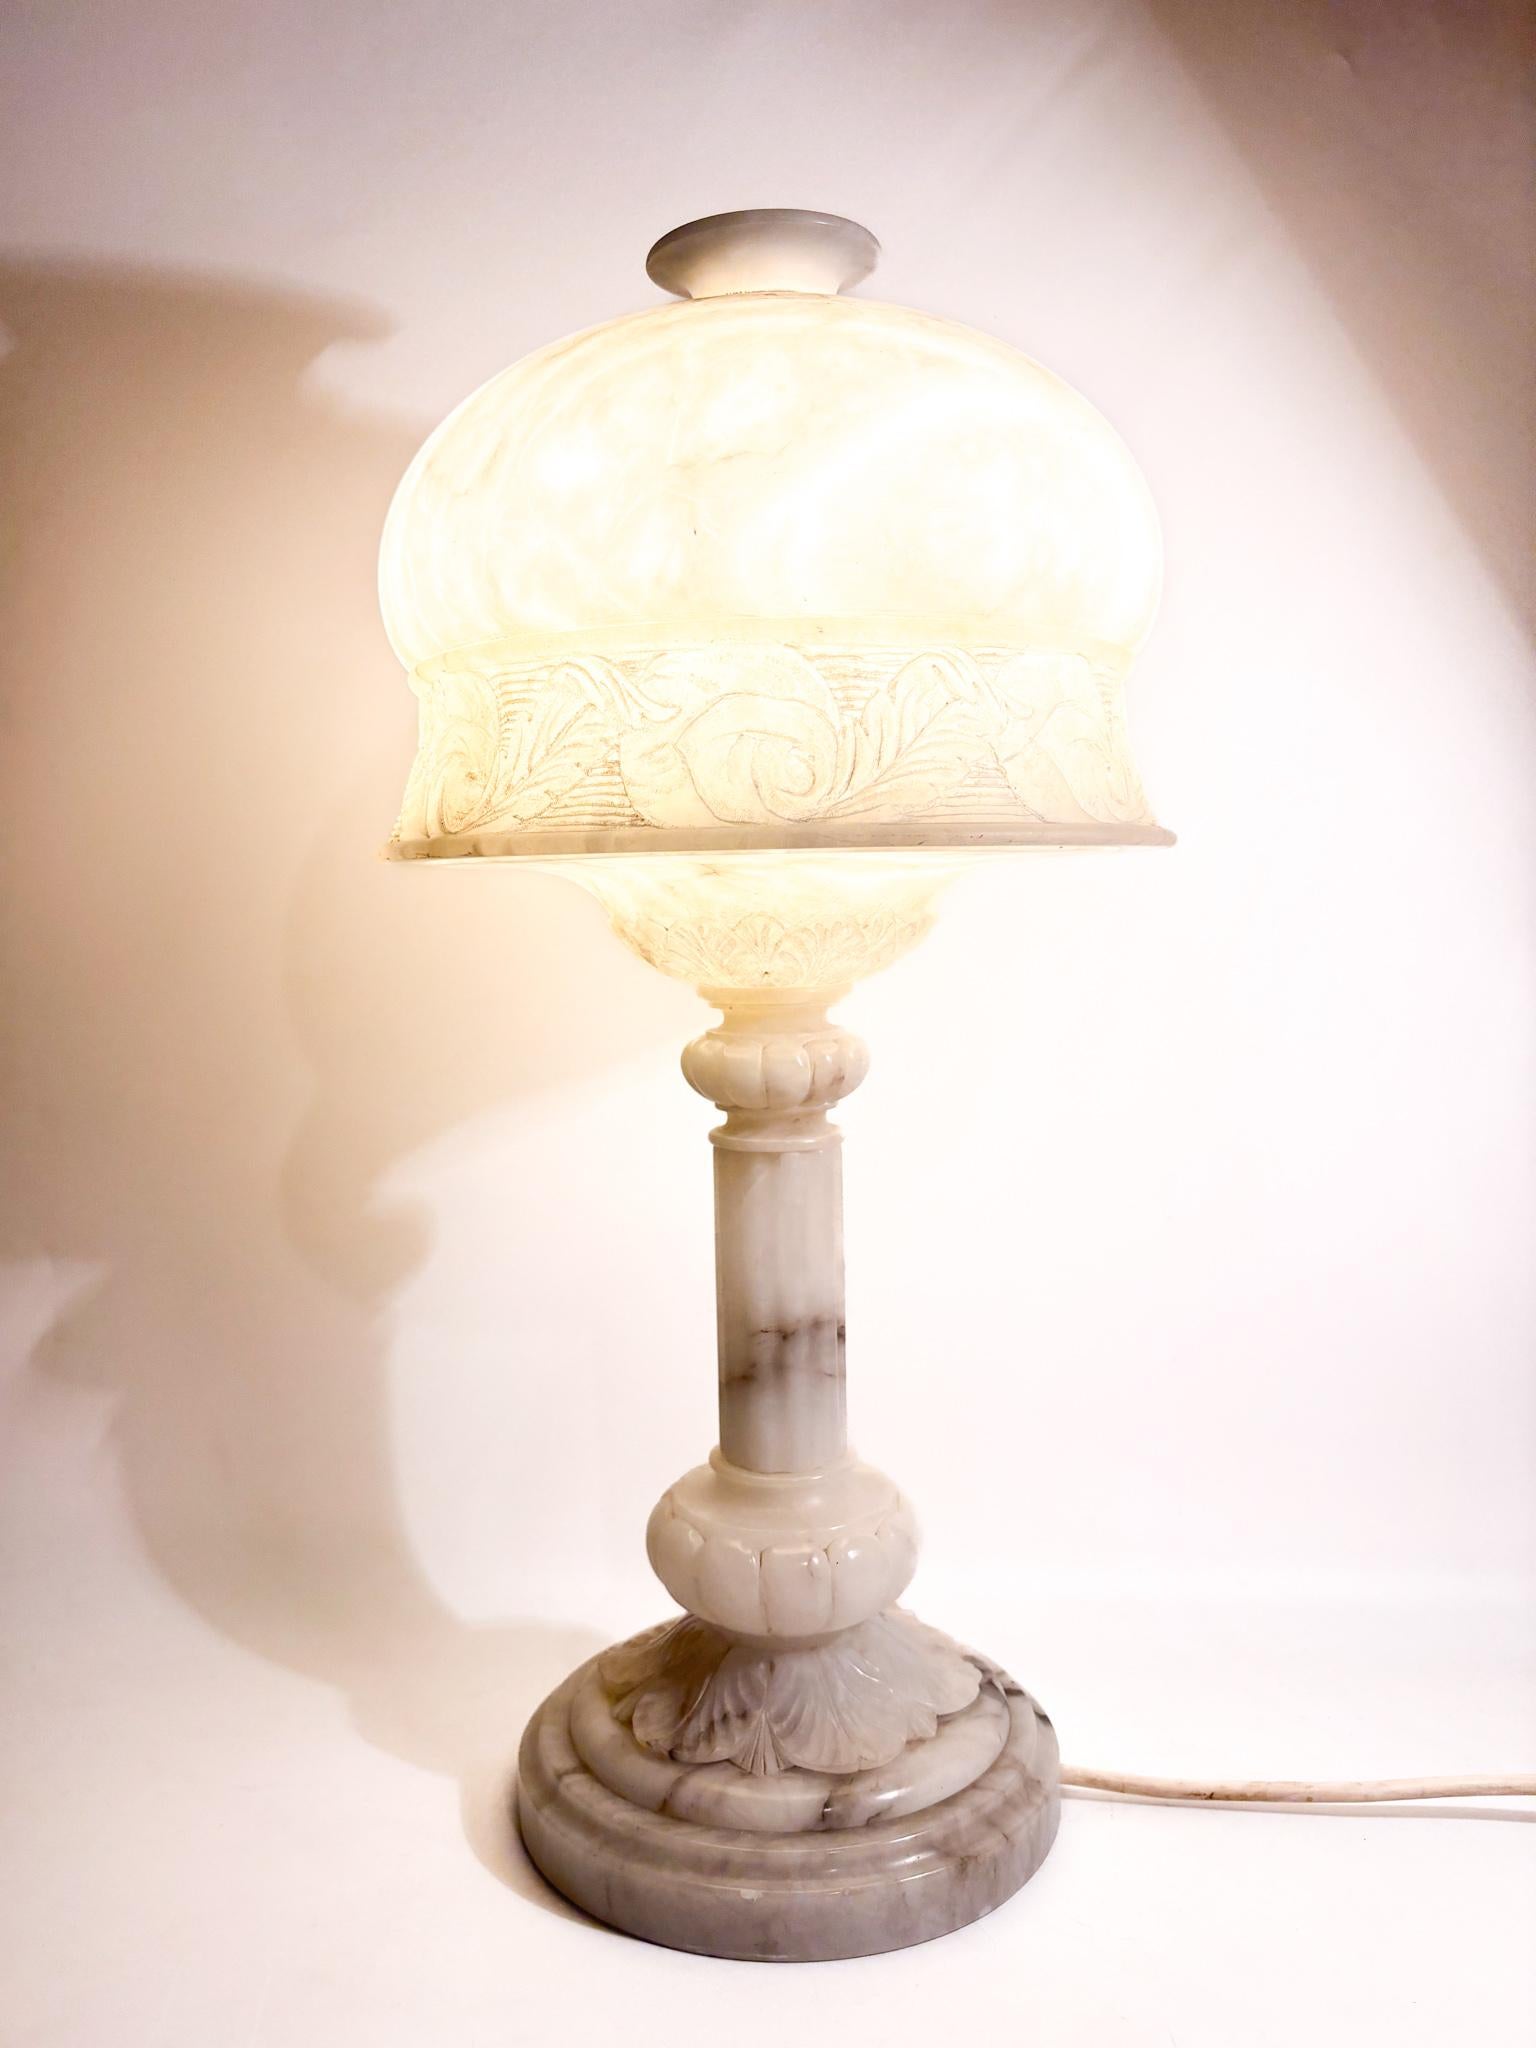 Alabaster Table Lamp Decorated in Relief with One Light, 1950s For Sale 3